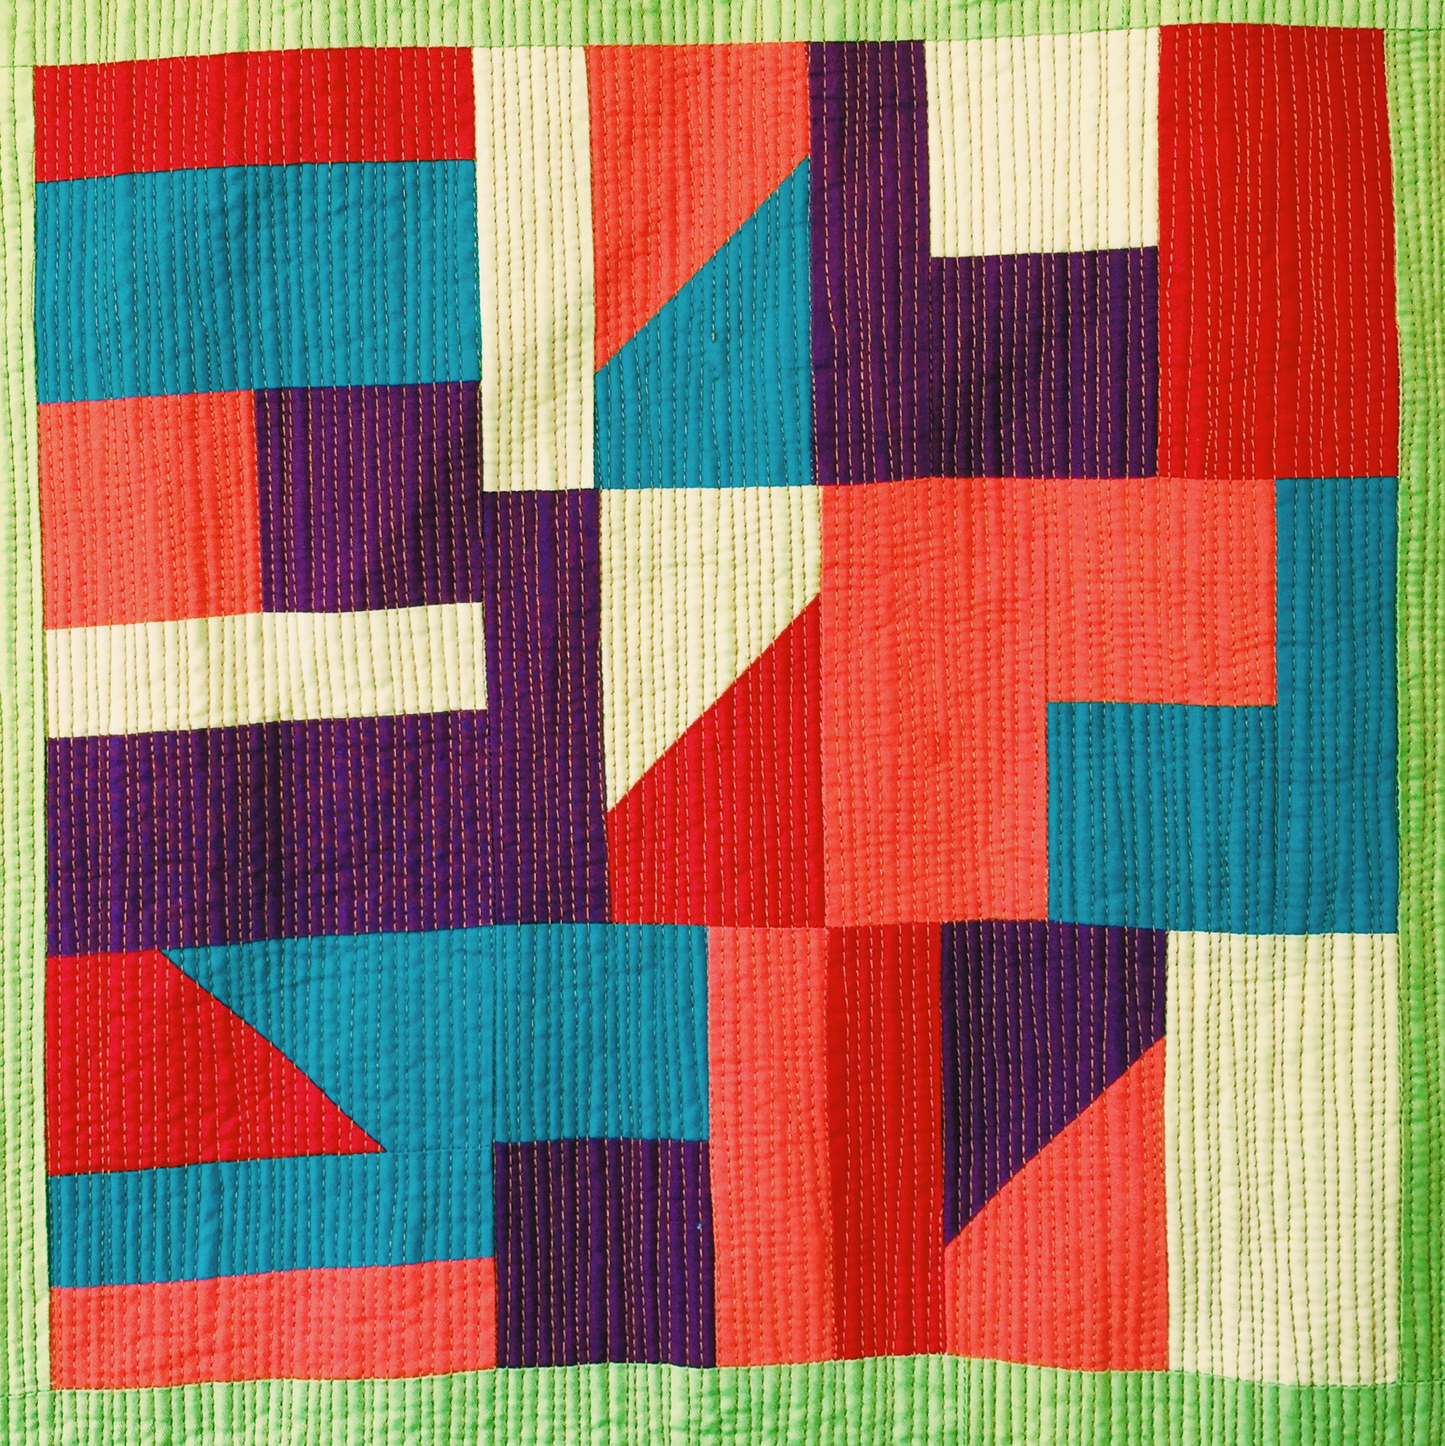 Pojagi Inspiration Quilt online course